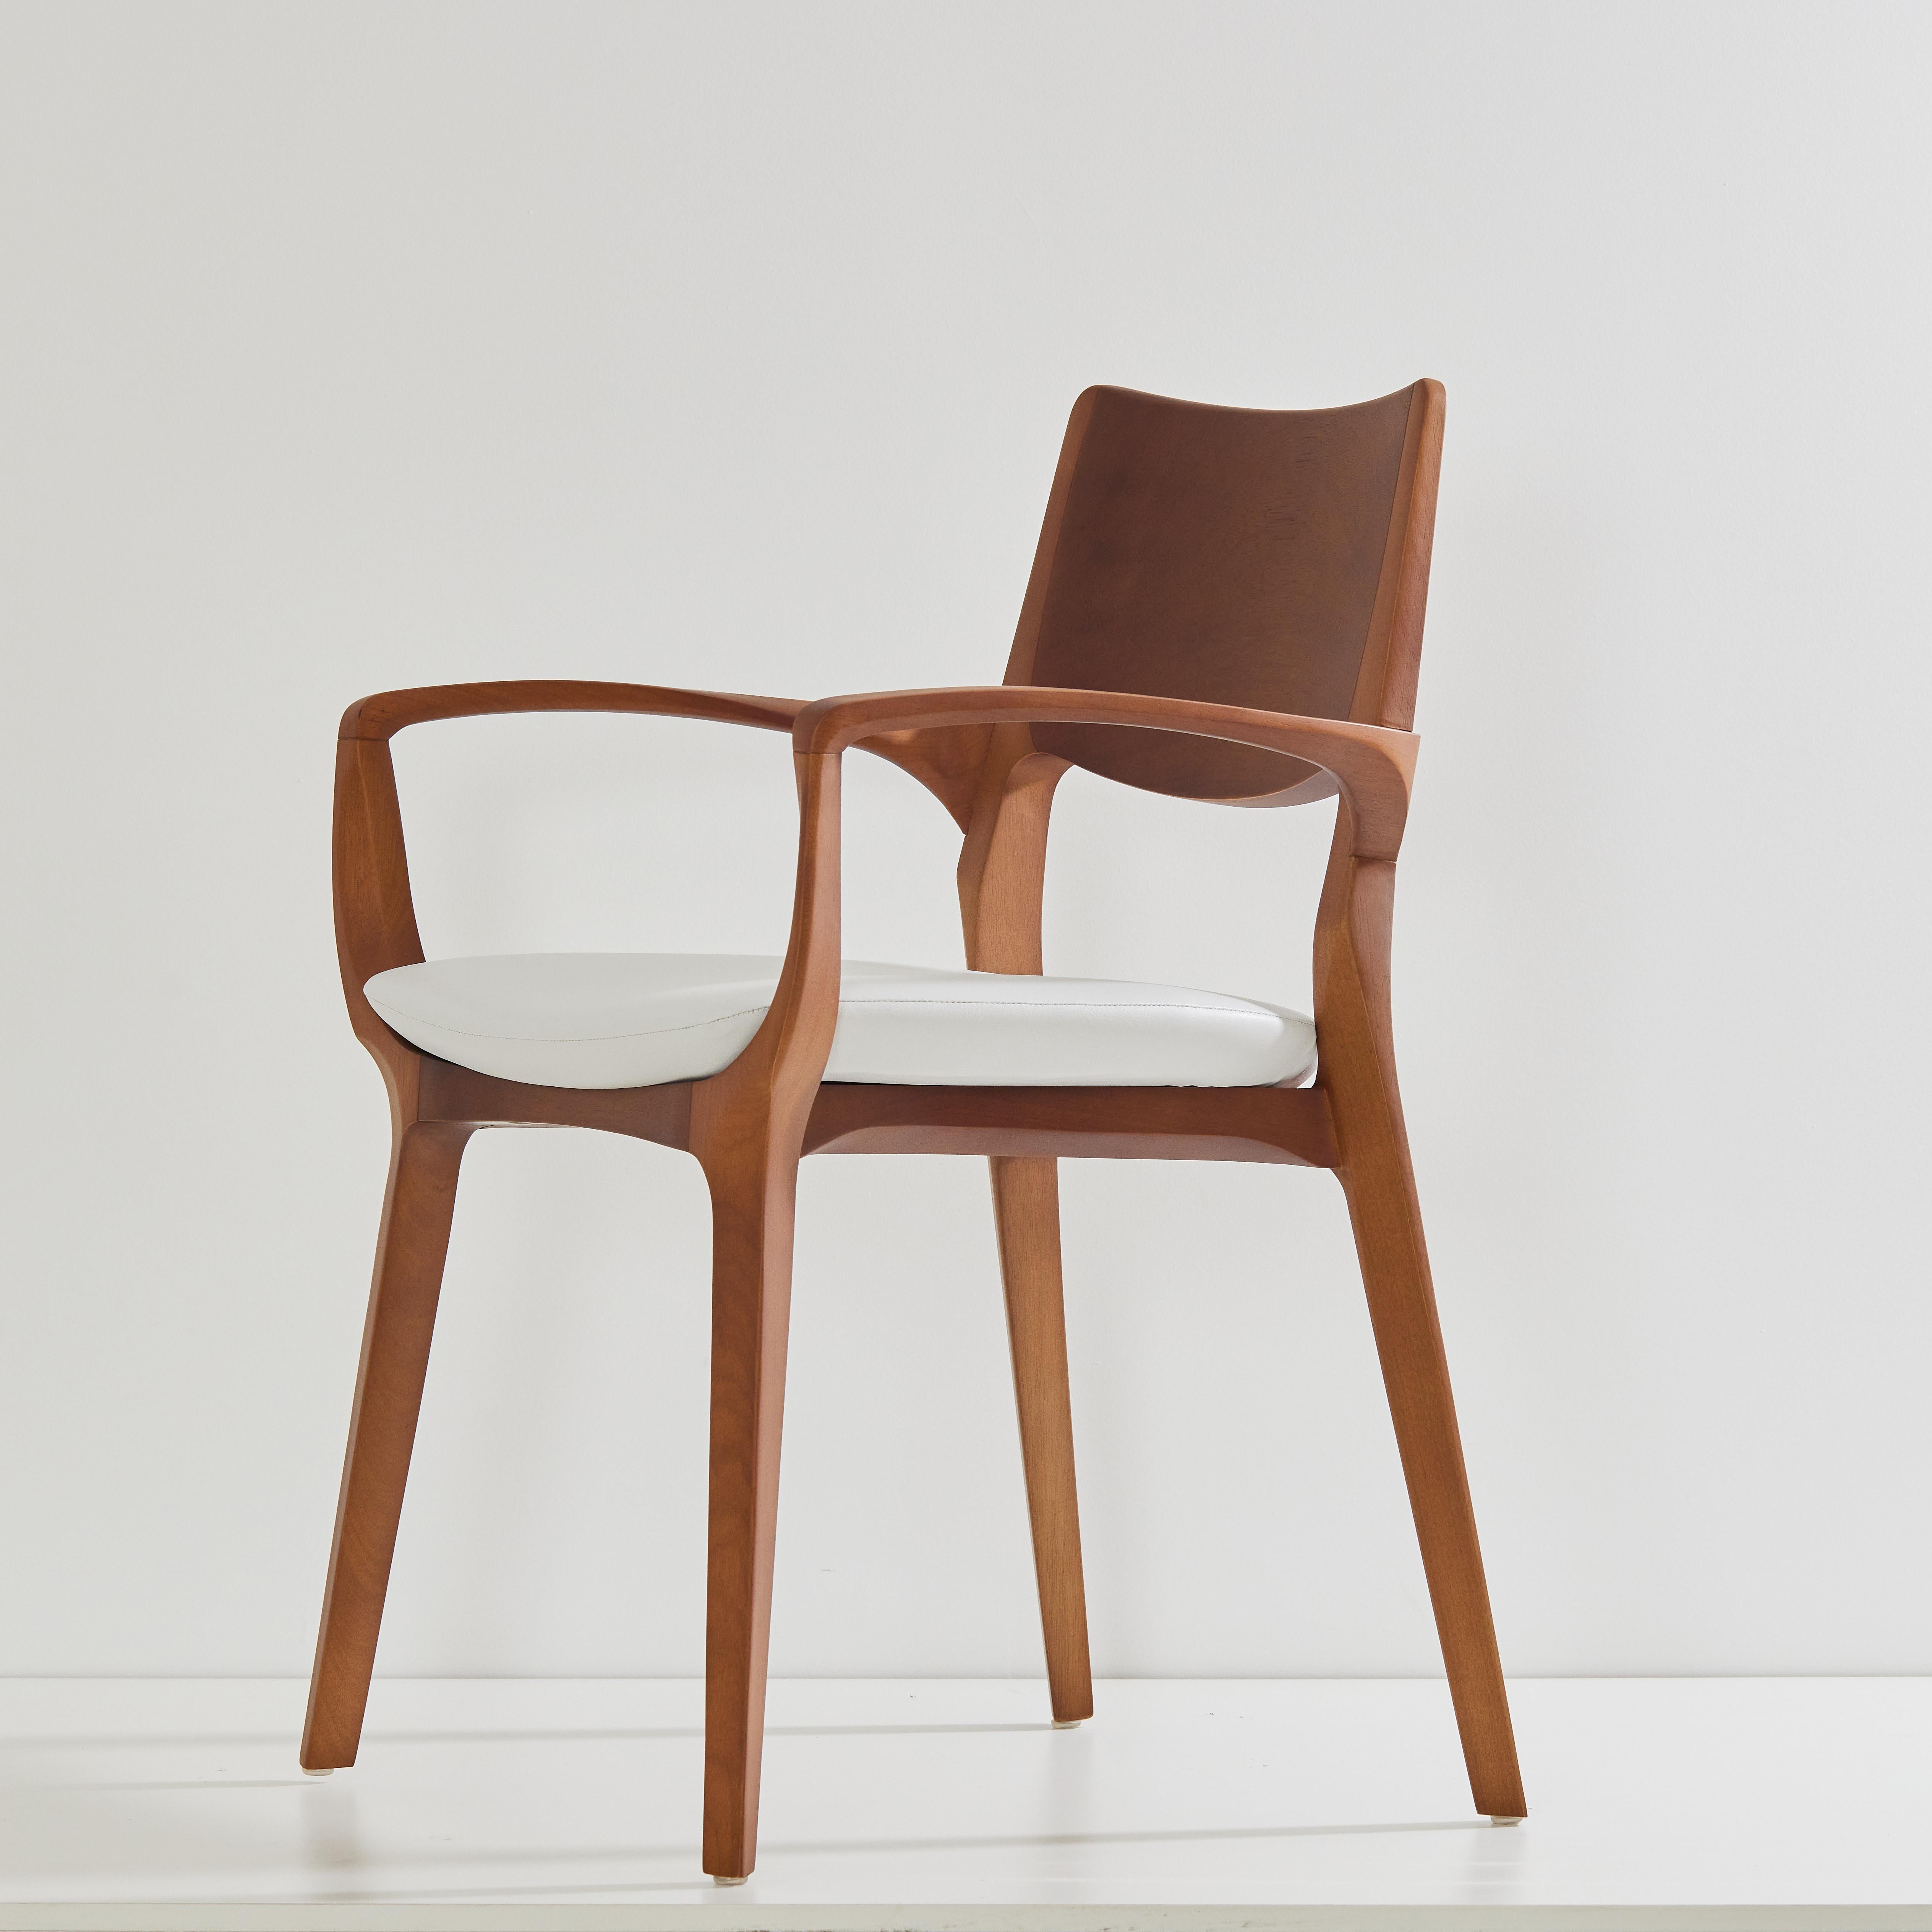 Brazilian Post-Modern Style Aurora Chair in honey solid wood, vegan leather seating For Sale